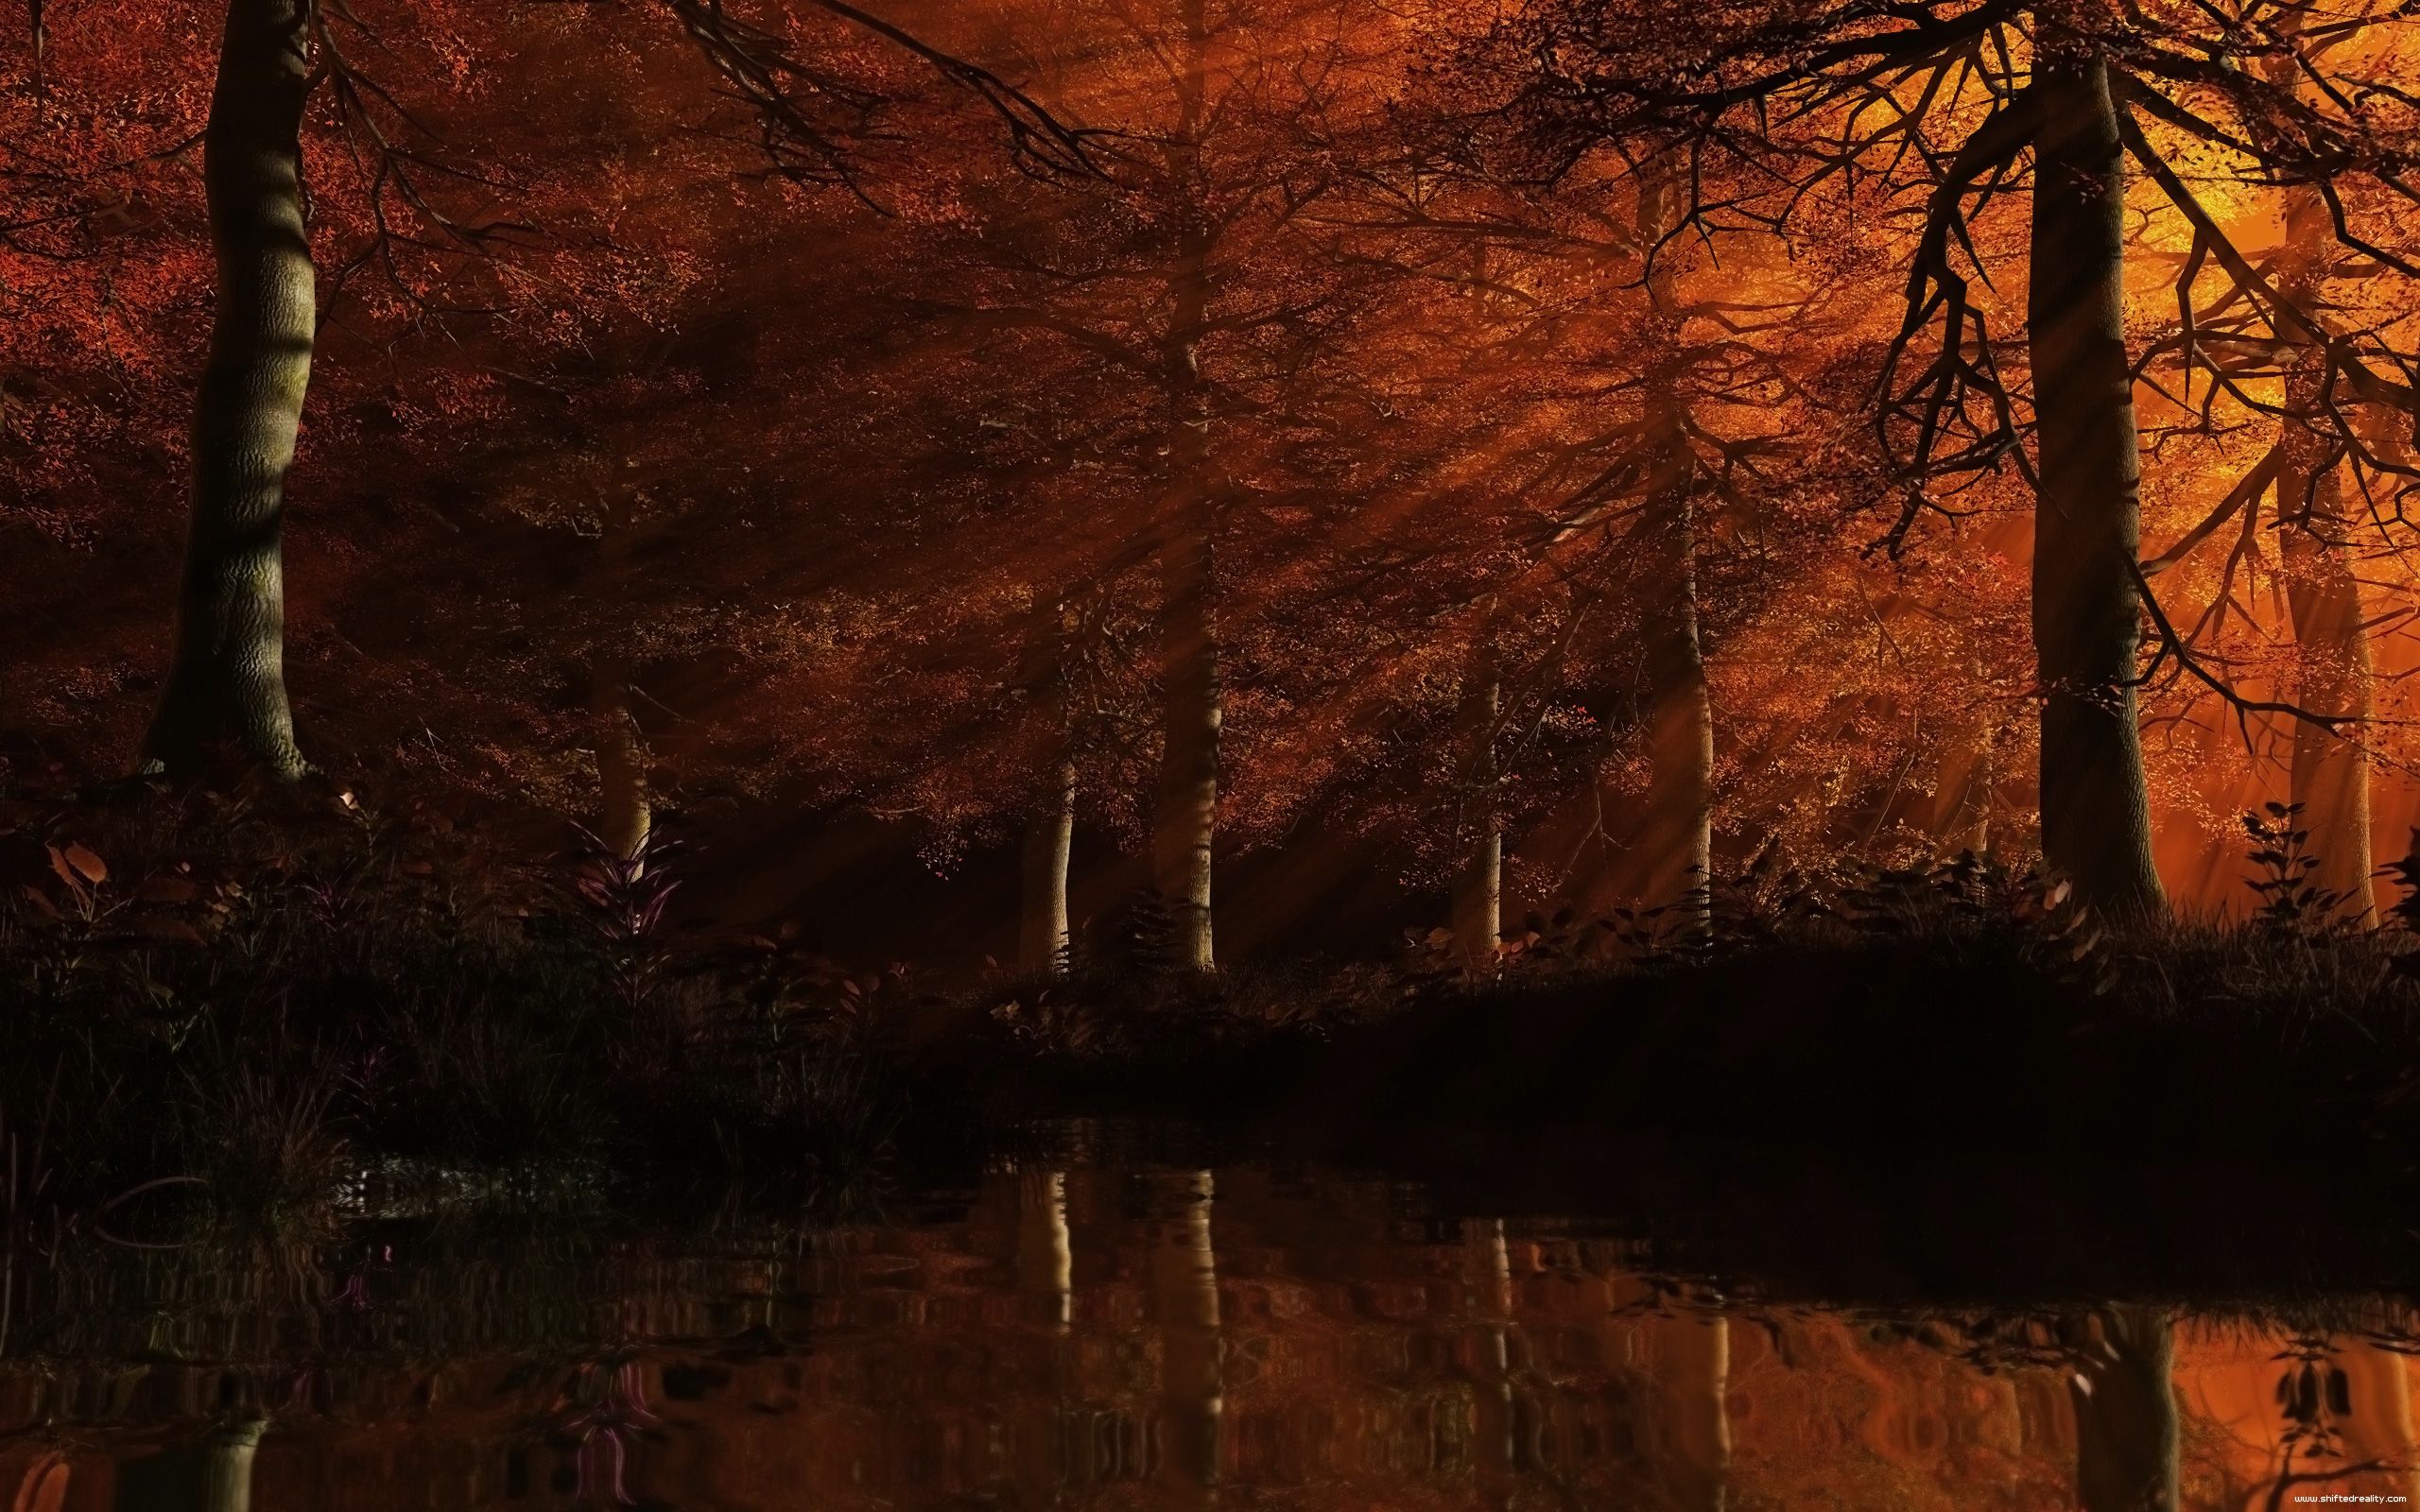 Autumn Forest At Night Wallpapers